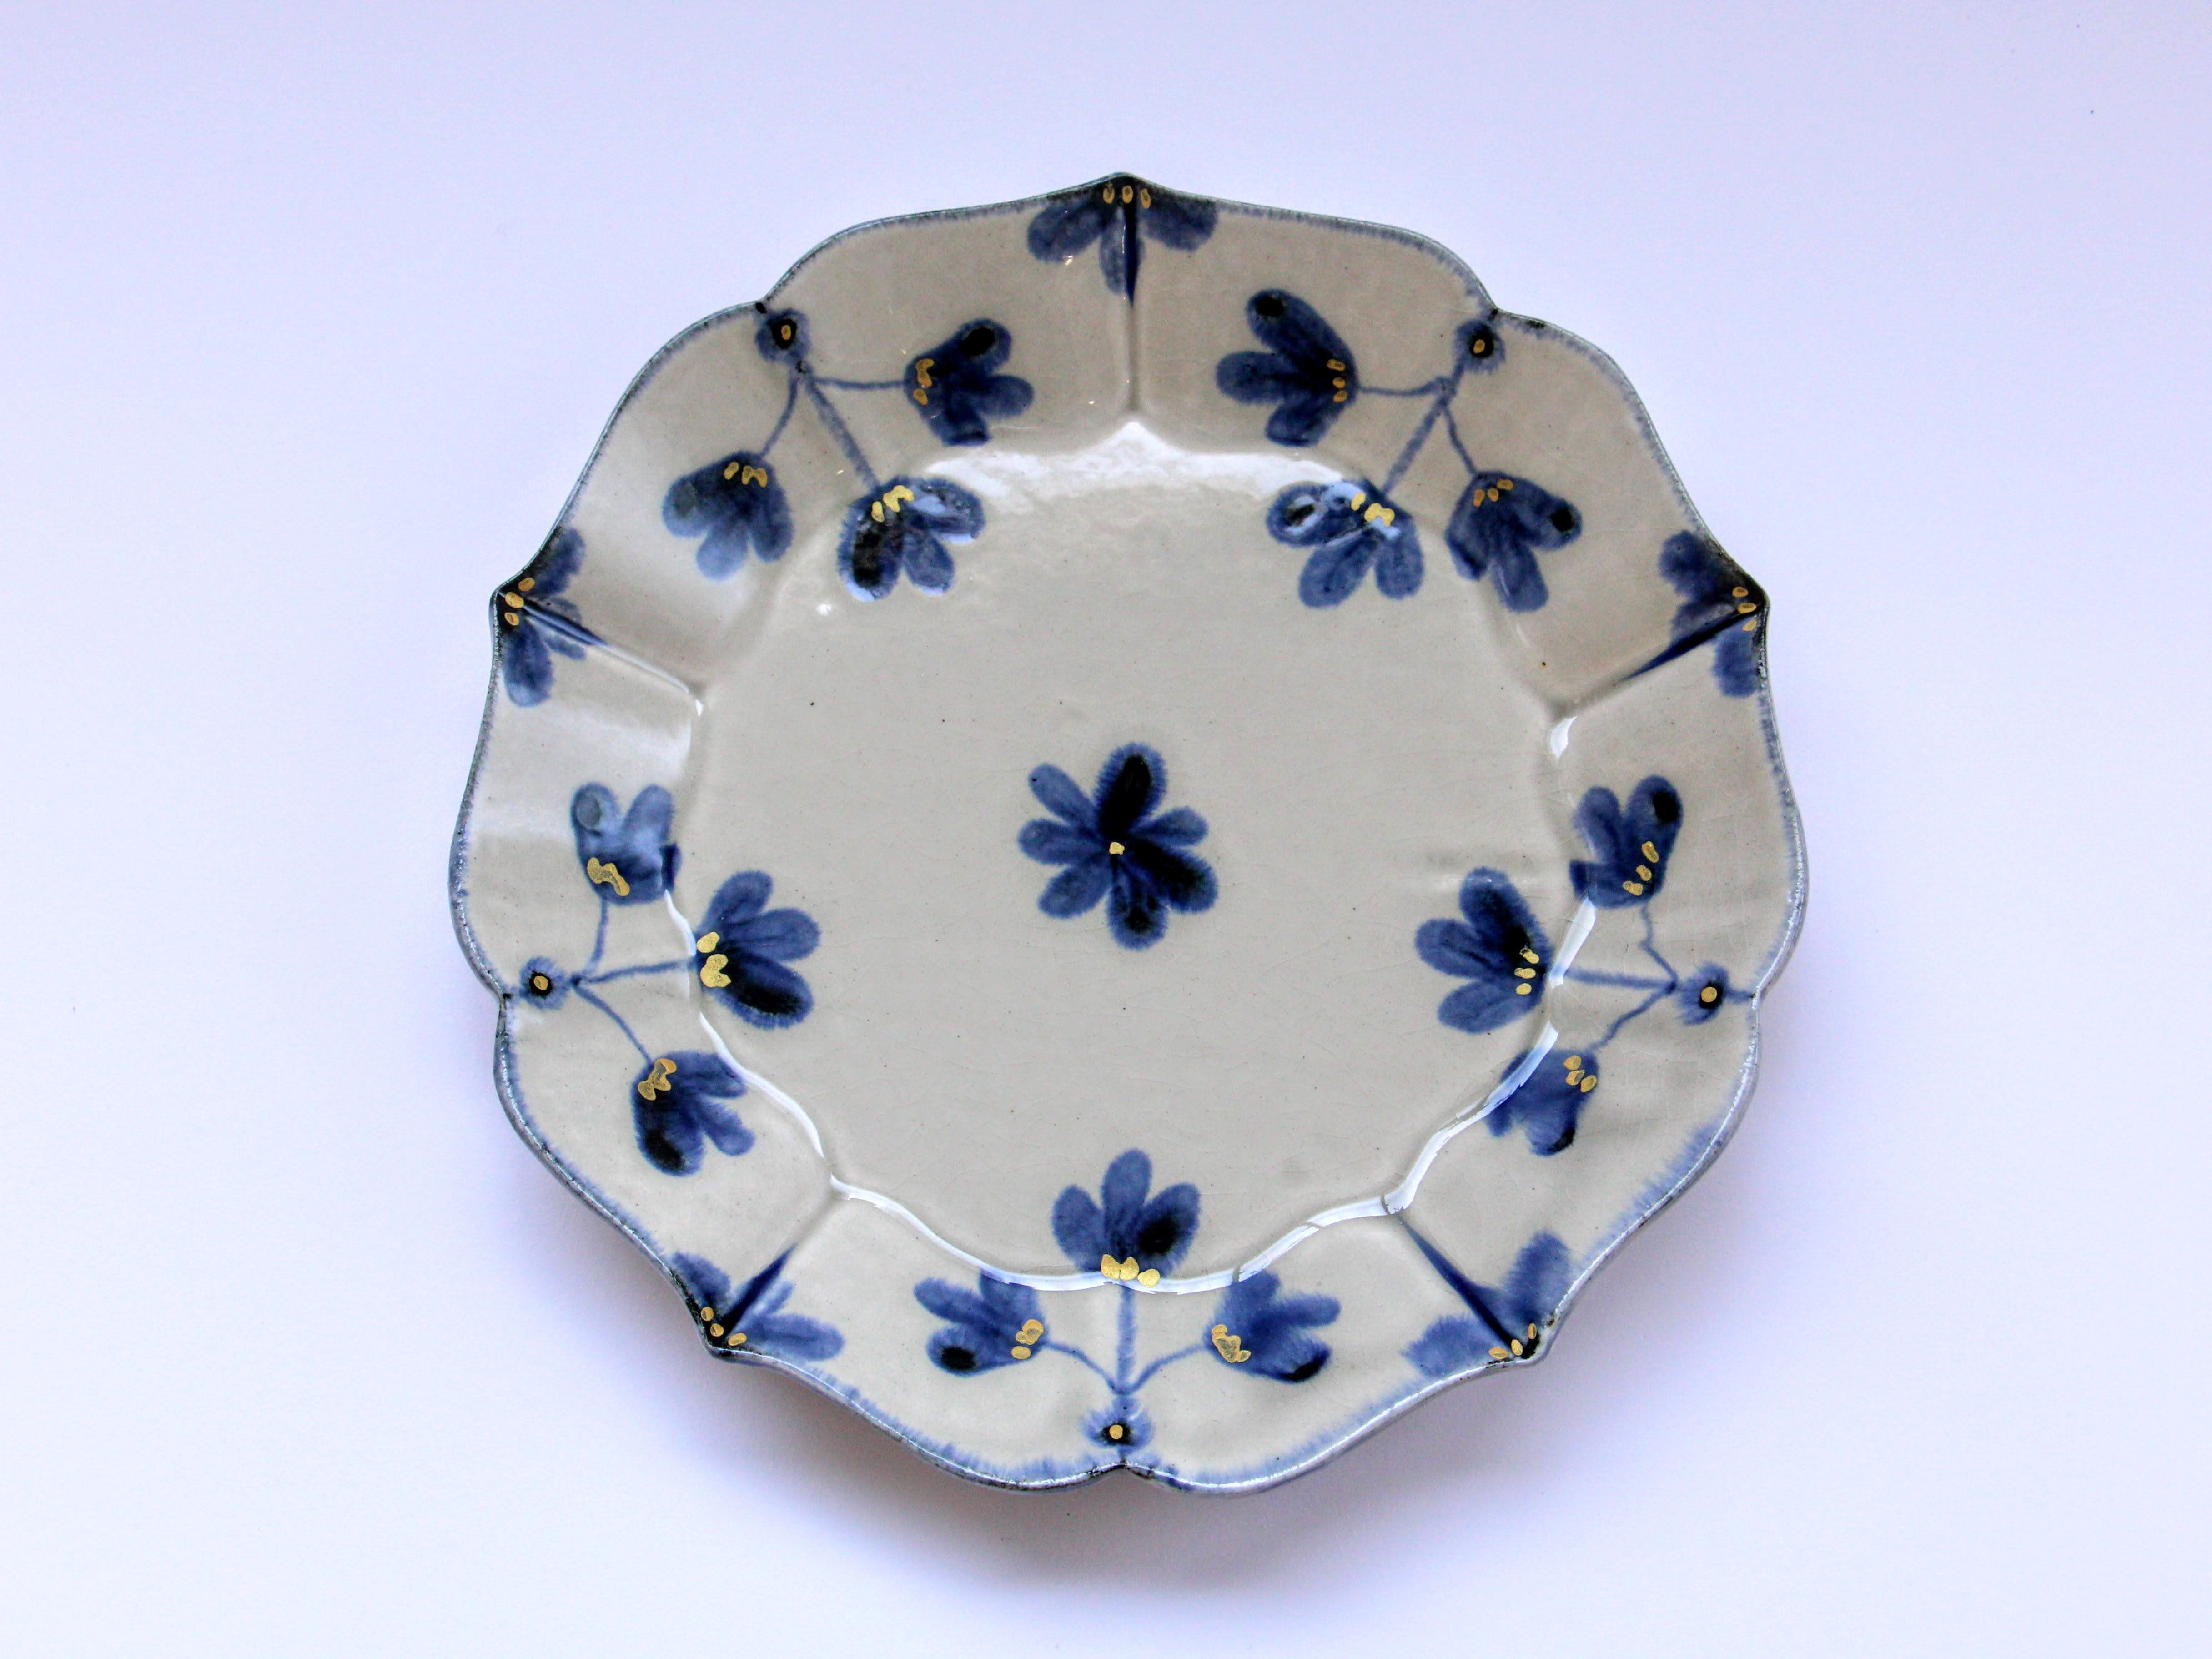 Gold-colored clay glaze flower pattern bellflower plate large [Kituru Seito]